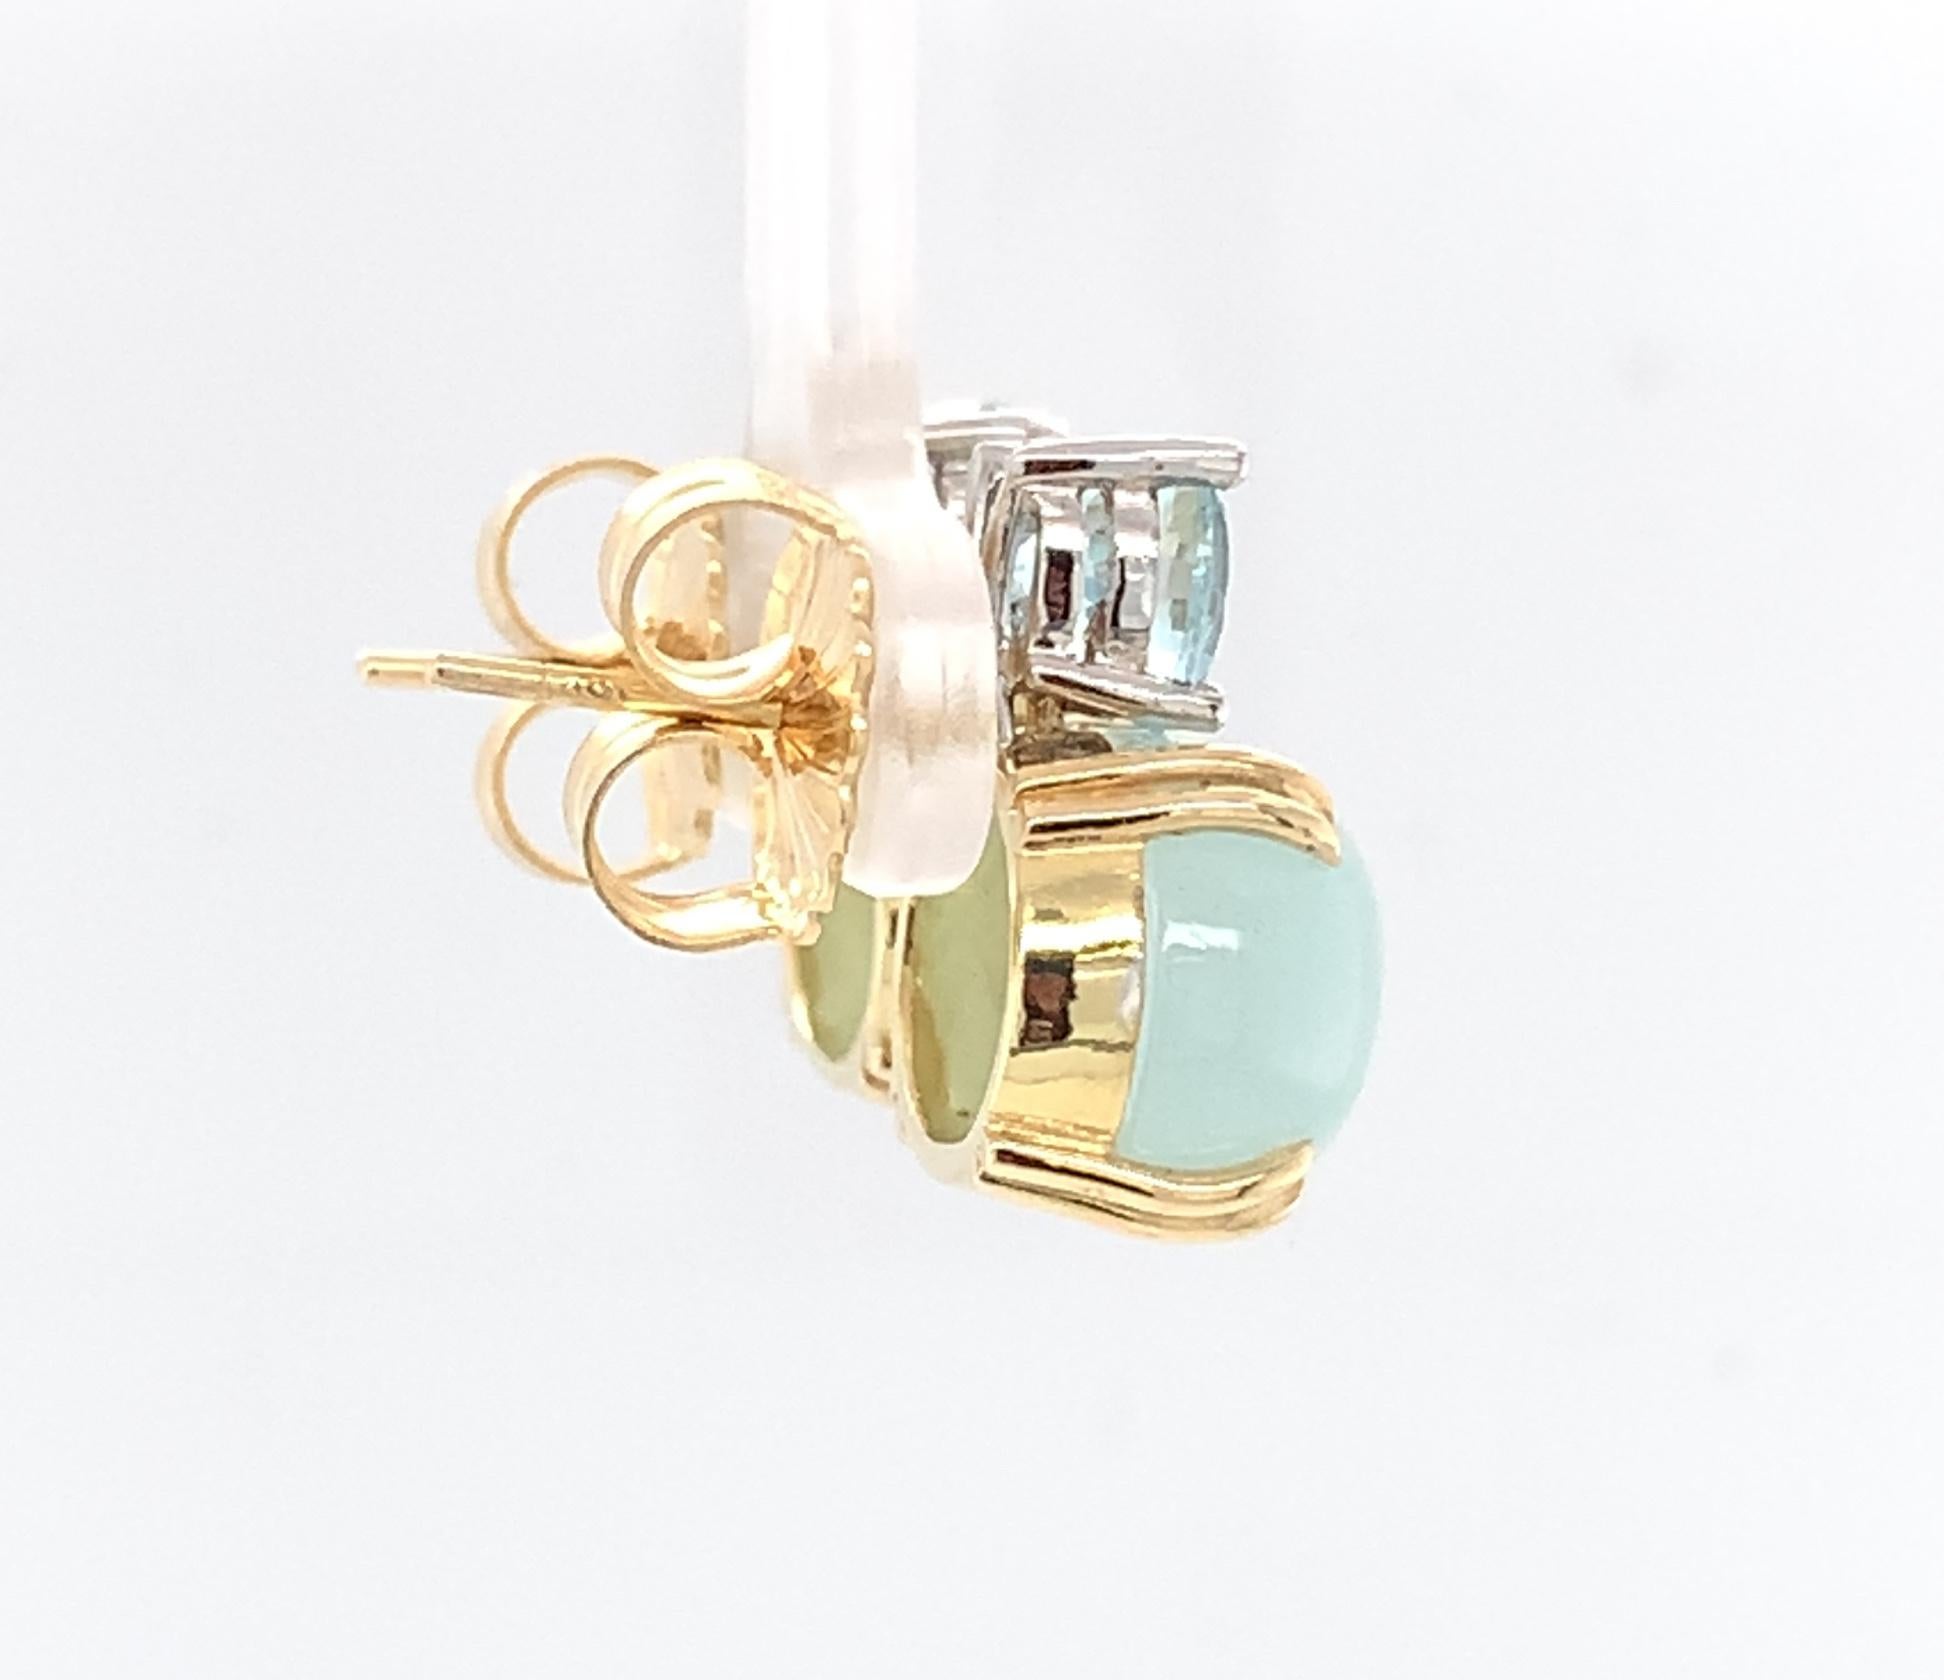 Faceted and Cabochon Aquamarine, Yellow, White Gold Post Drop Earrings 1